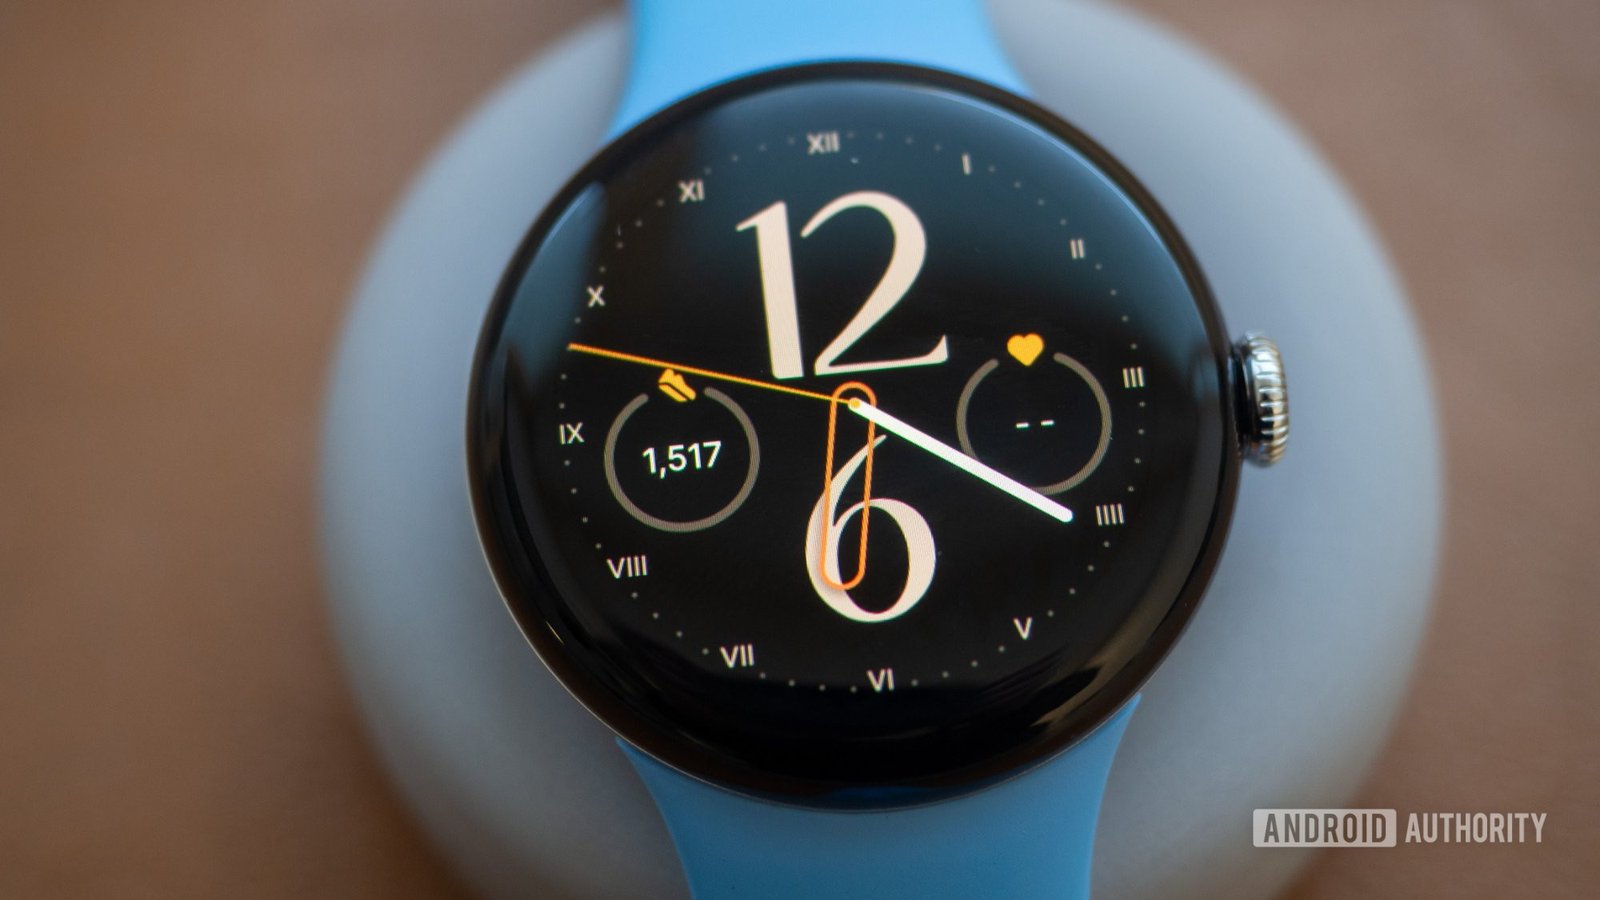 Wear OS 5 Developer Preview has two new features Google didn’t tell us about